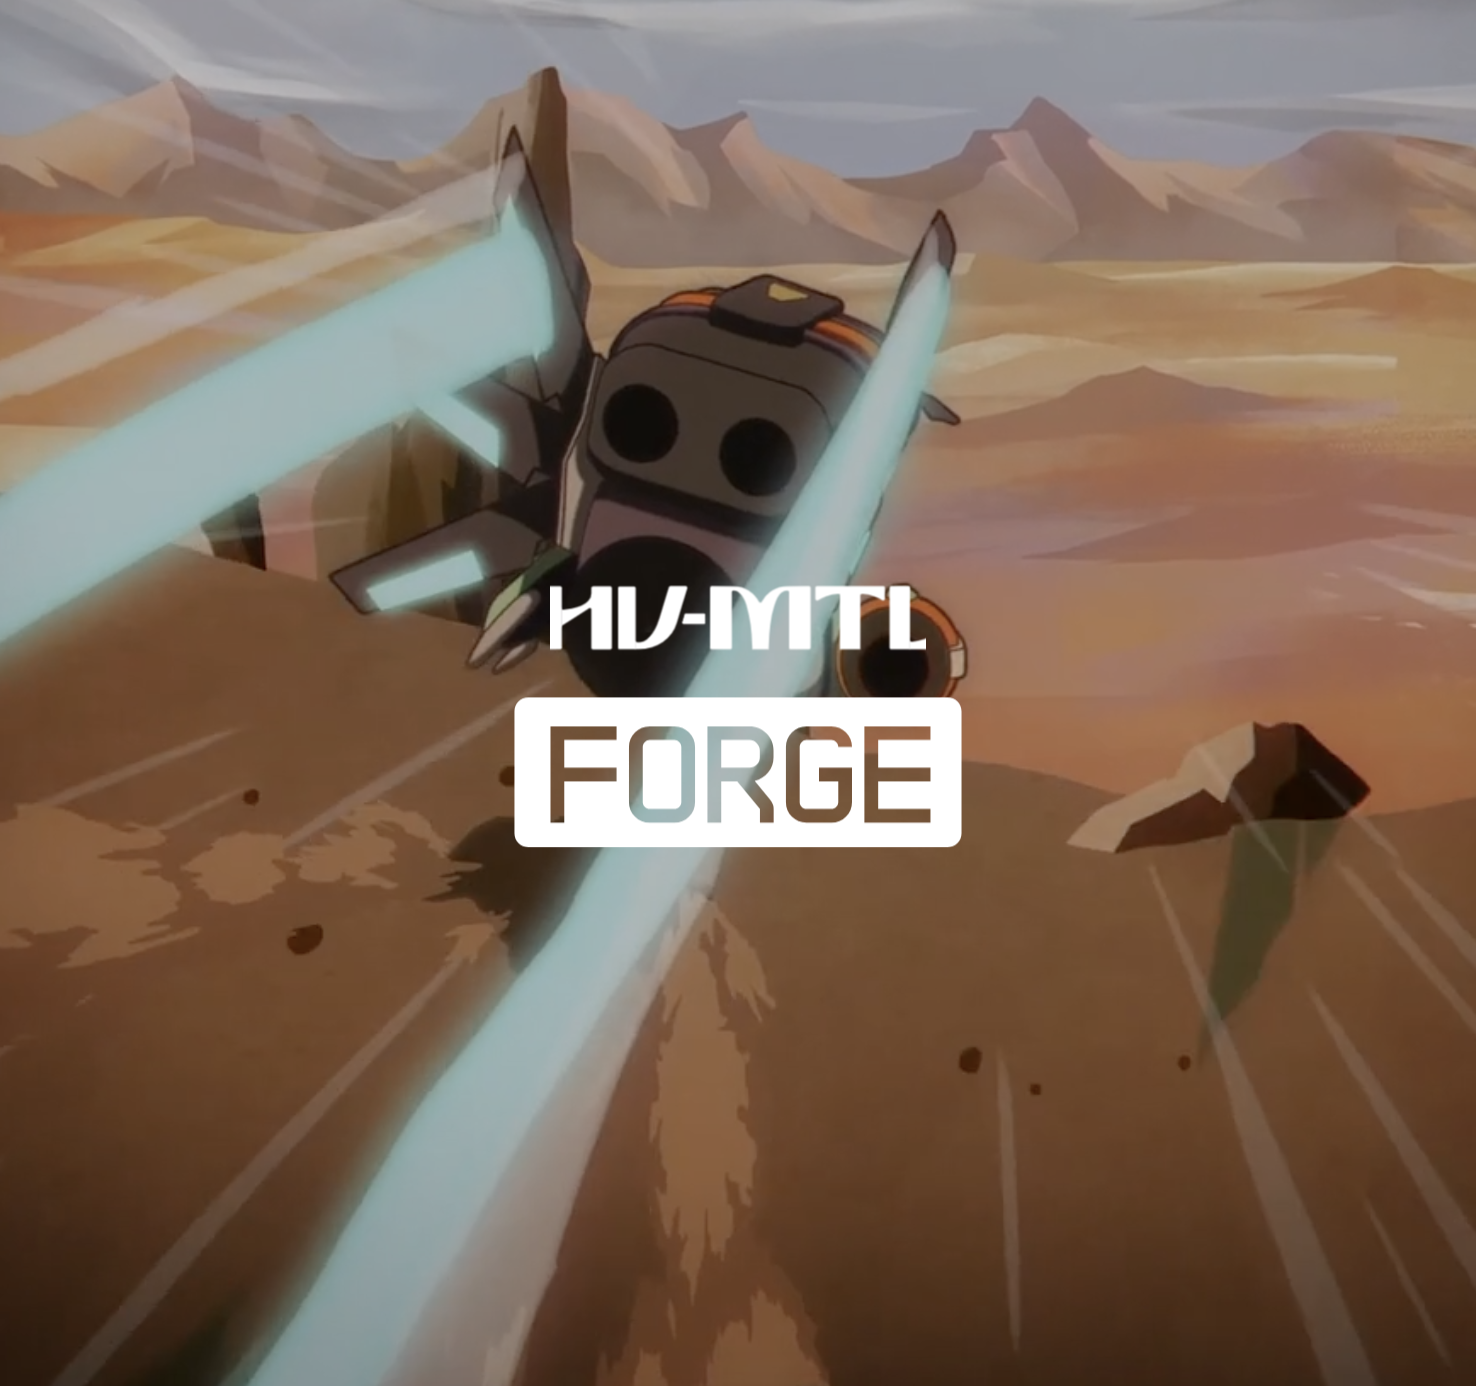 Bored Ape Yacht Club's Yuga Labs Unveil HV-MTL Forge - Ushering in a New Era for NFT Gaming